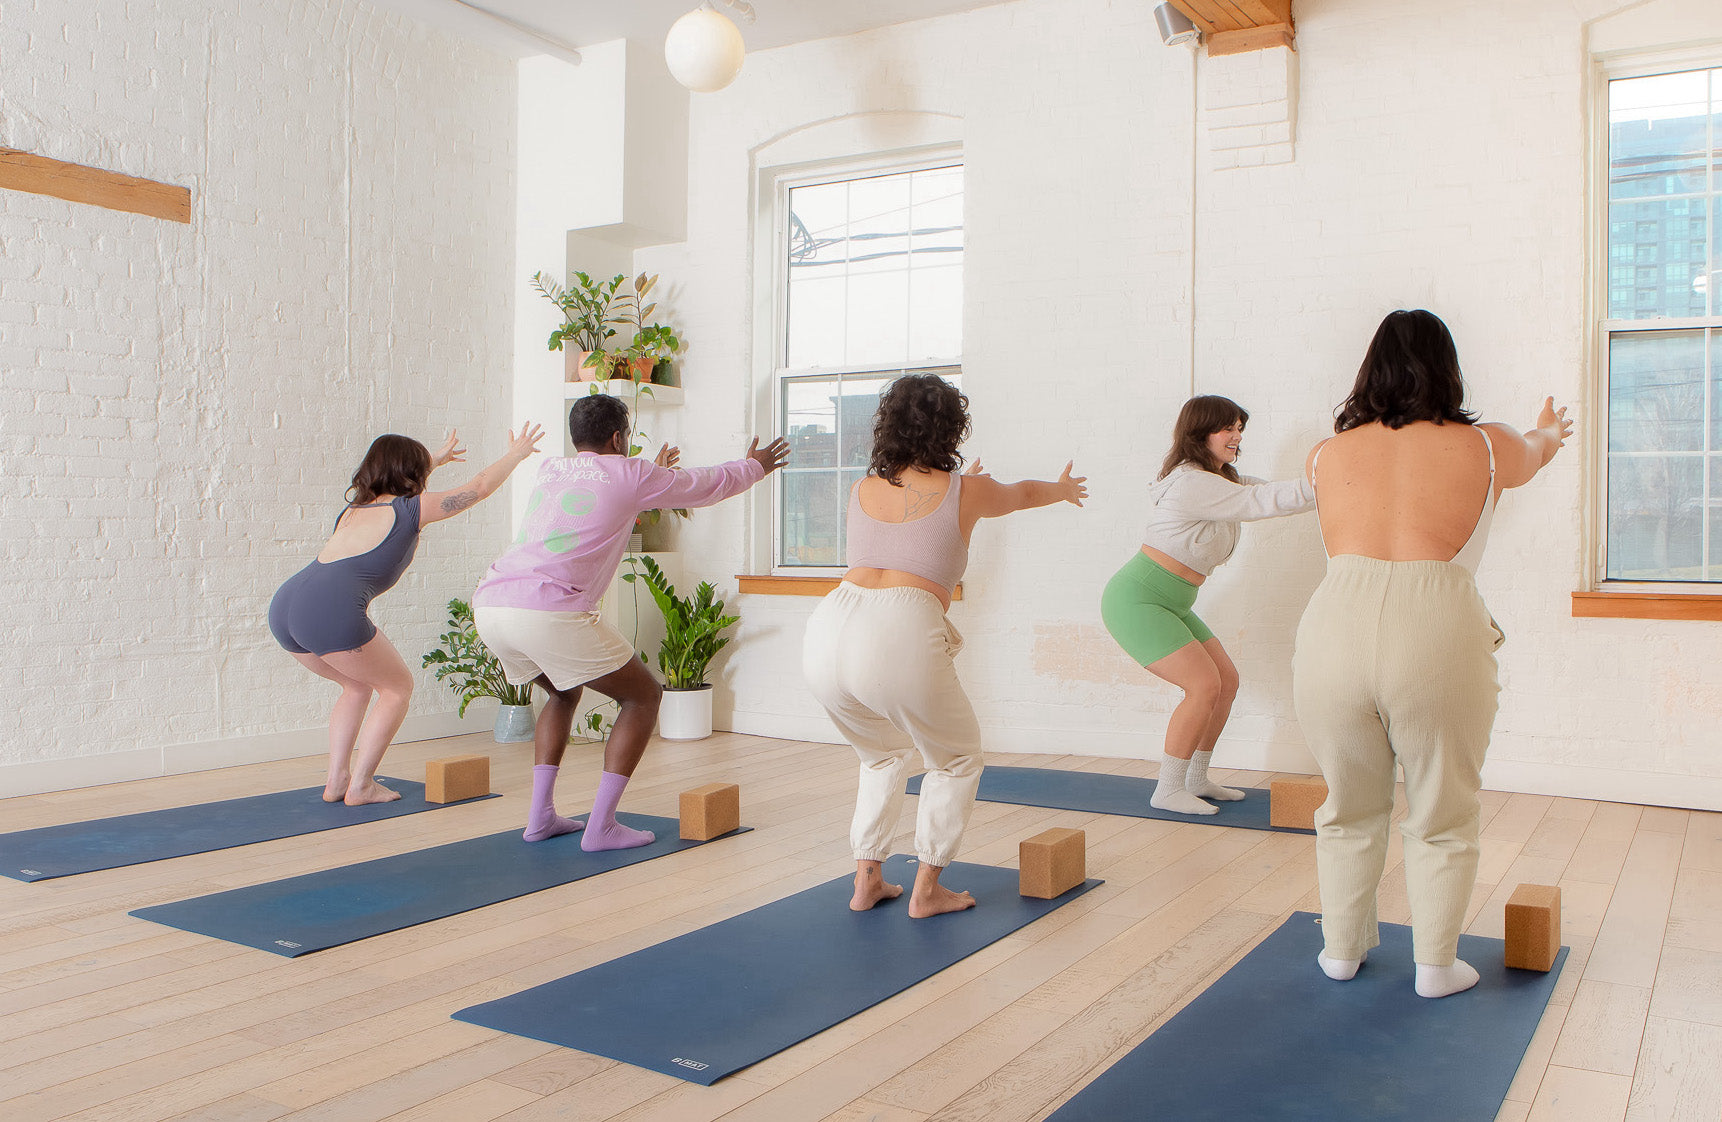 The BEST 10 Yoga Studio spaces for rent in Toronto, Canada